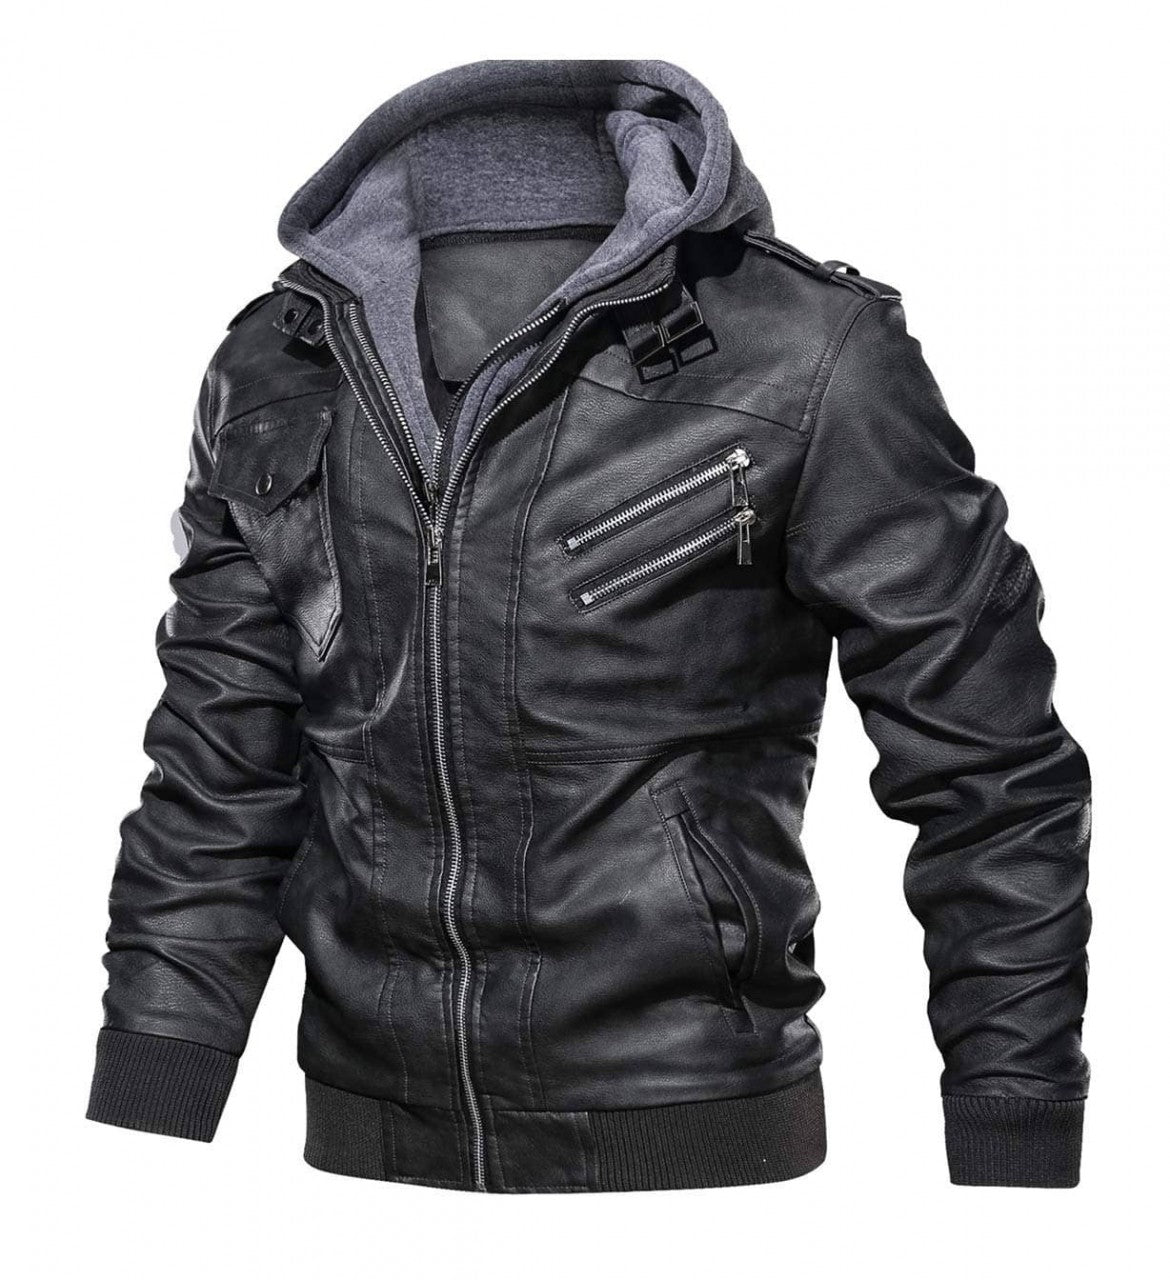 Black Lambskin Leather Jacket with Removable Hood Mens